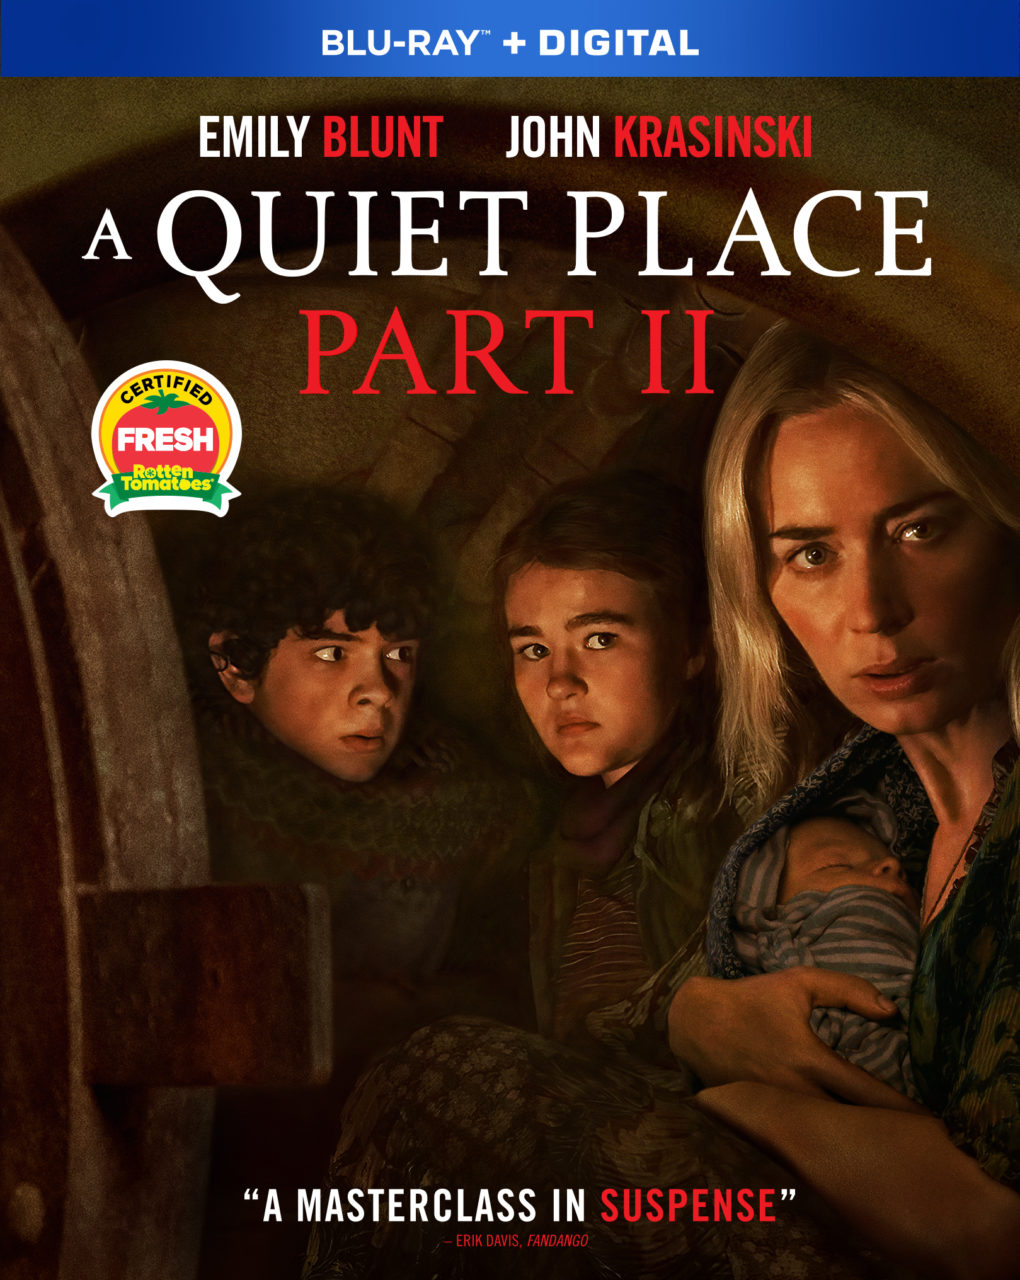 A Quiet Place Part II Blu-Ray Combo Pack cover (Paramount Home Entertainment)